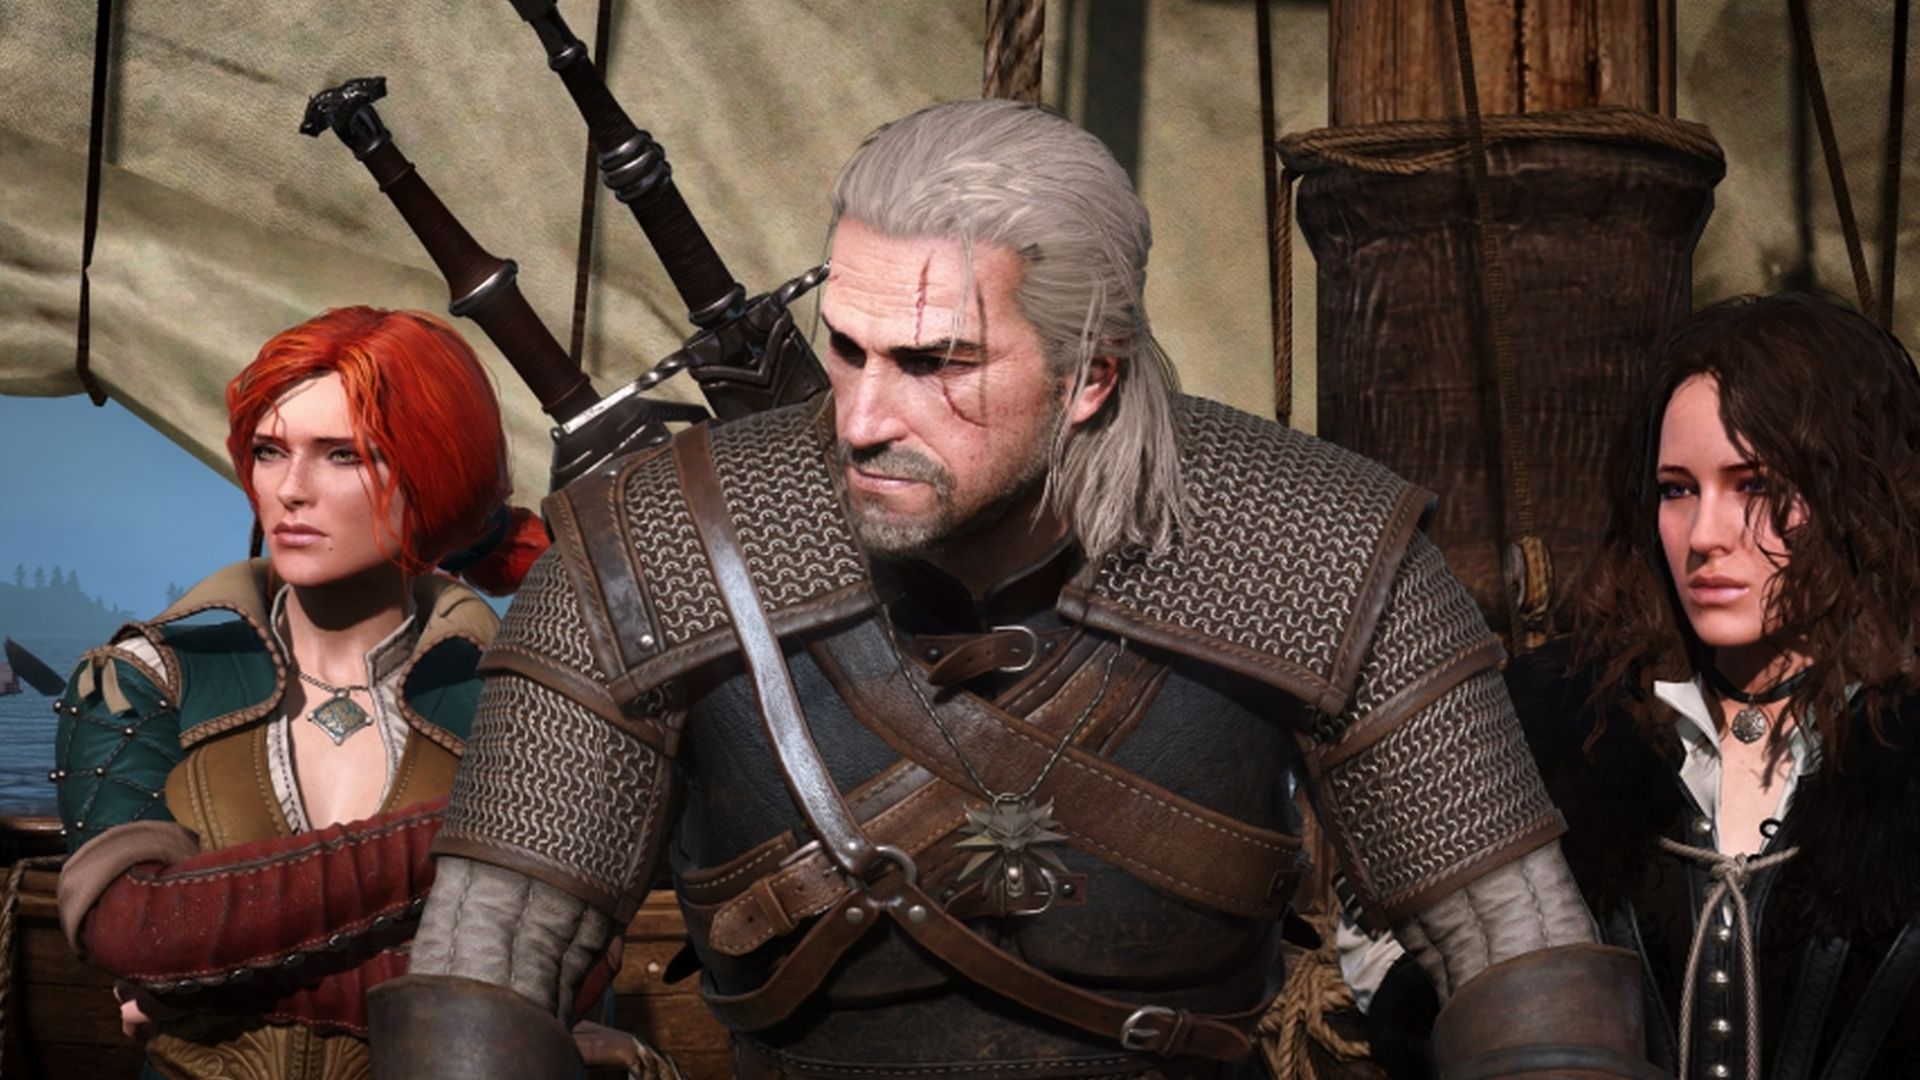 The Witcher 3 PS5 Update Release Date Finally Confirmed for 2022